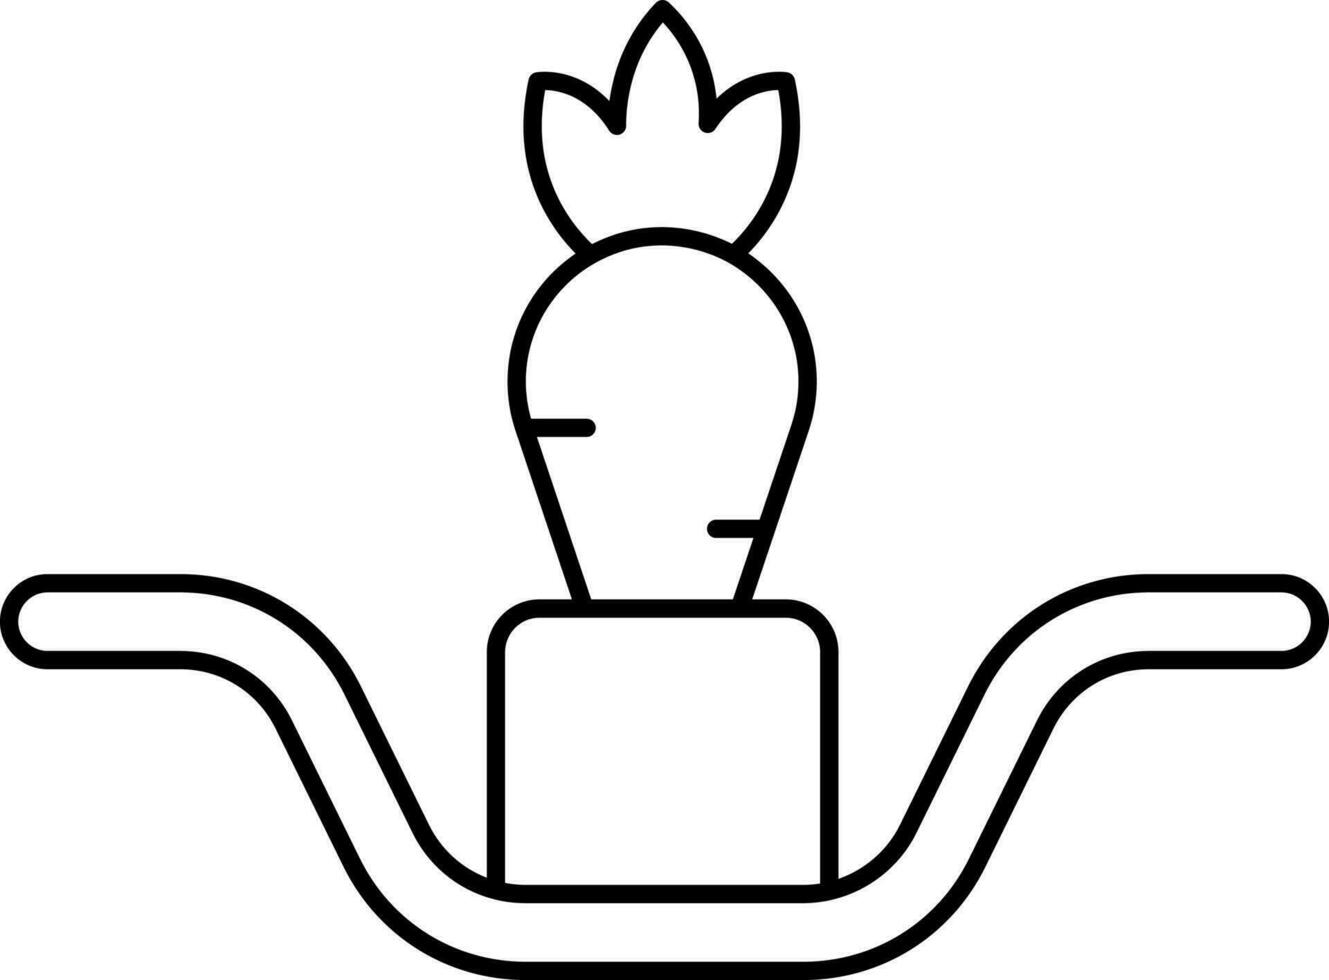 Carrot Trap Icon In Black Thin Line Art. vector